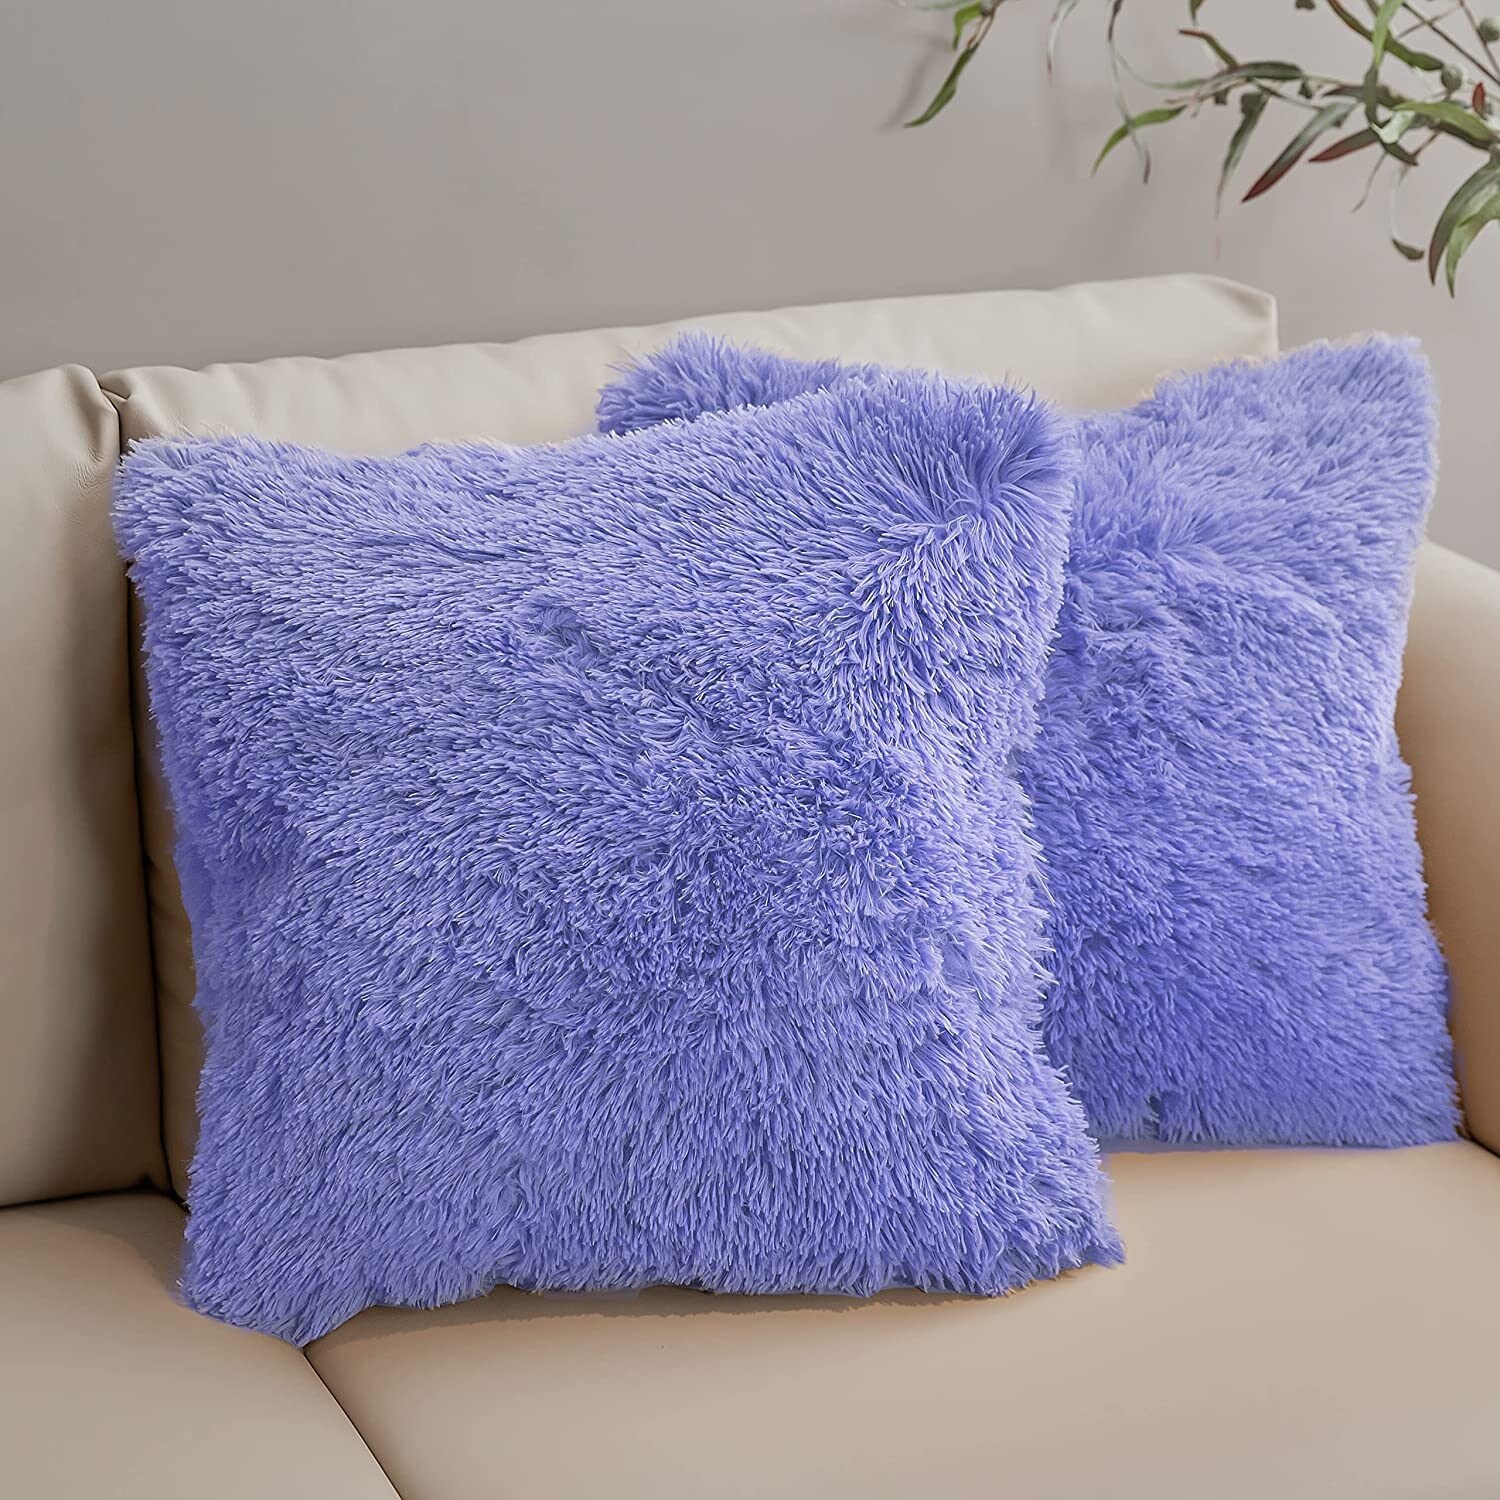 Cheer Collection Set of 2 Shaggy Long Hair Throw Pillows  Super Soft and  Plush Faux Fur Accent Pillows - 18 x 18 inches - Cheer Collection